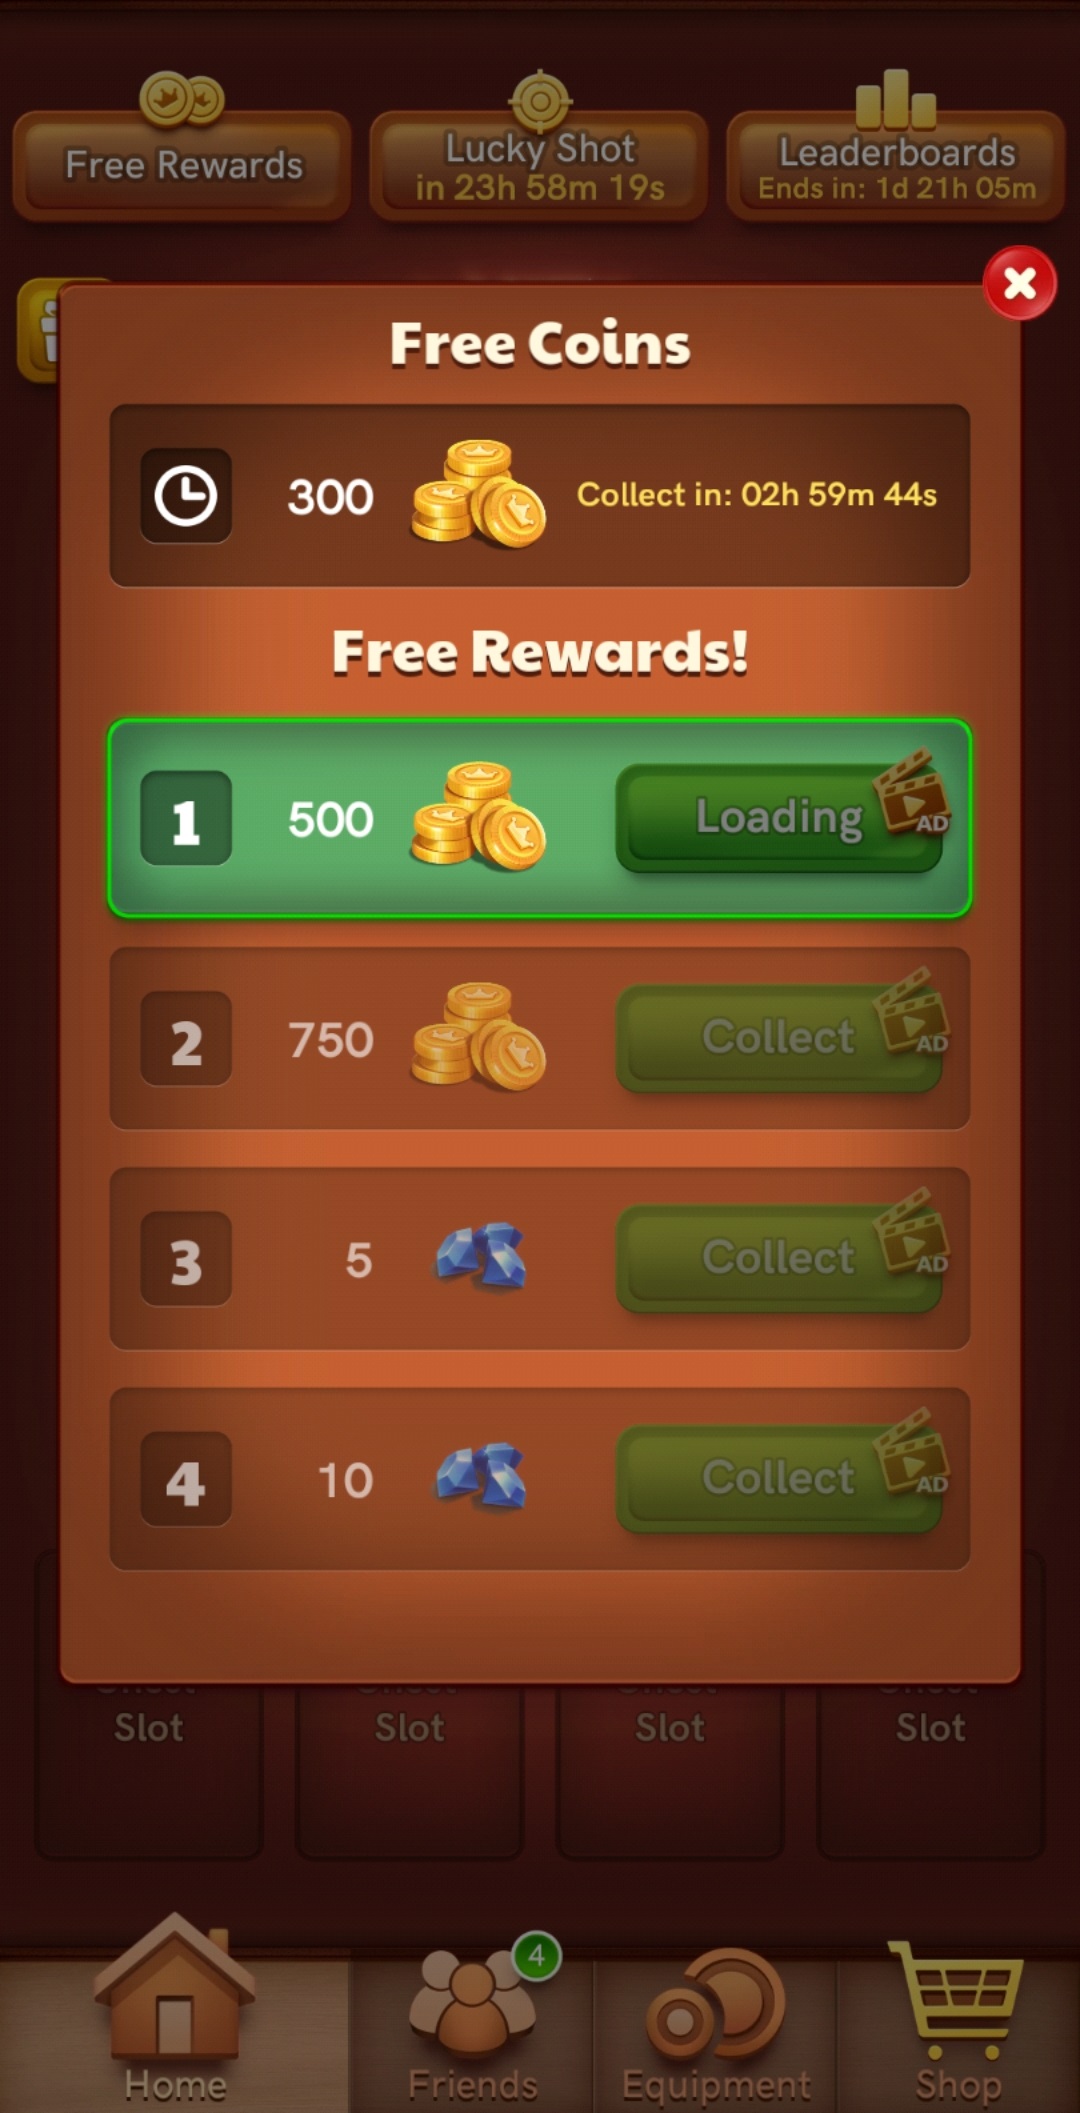 Why Am I Not Able To Claim Free Rewards Miniclip Player Experience